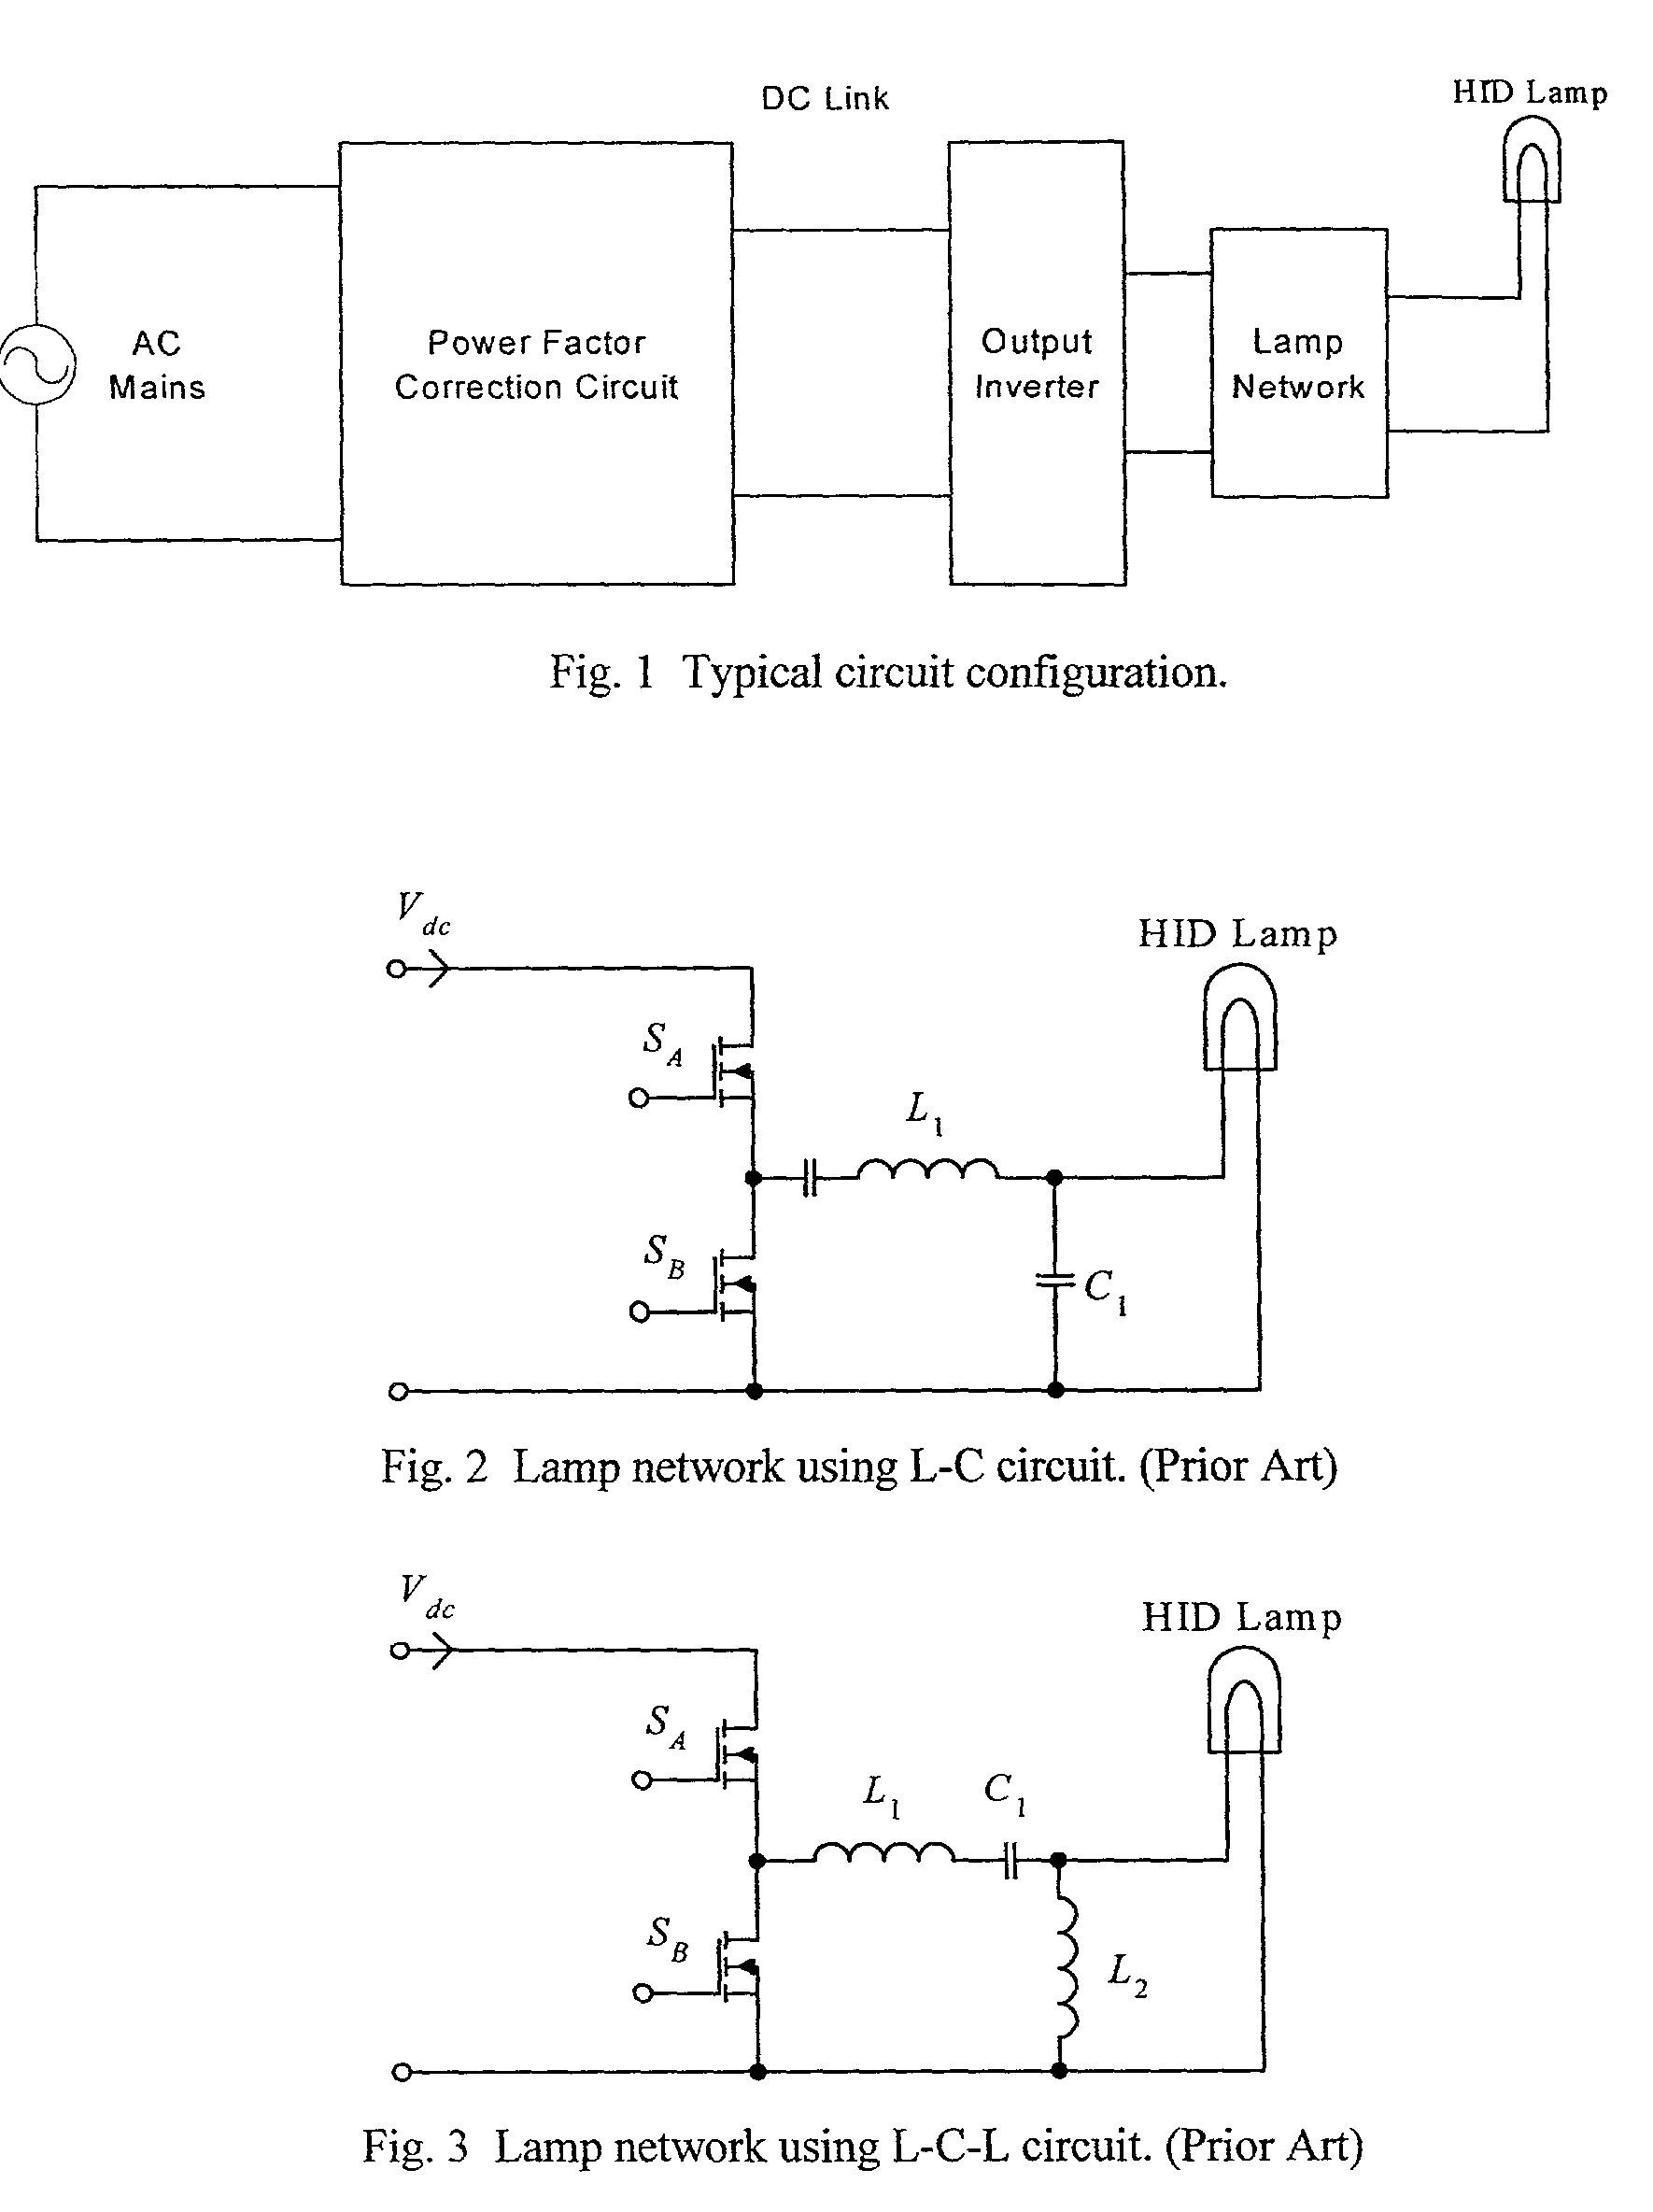 Circuit designs and control techniques for high frequency electronic ballasts for high intensity discharge lamps